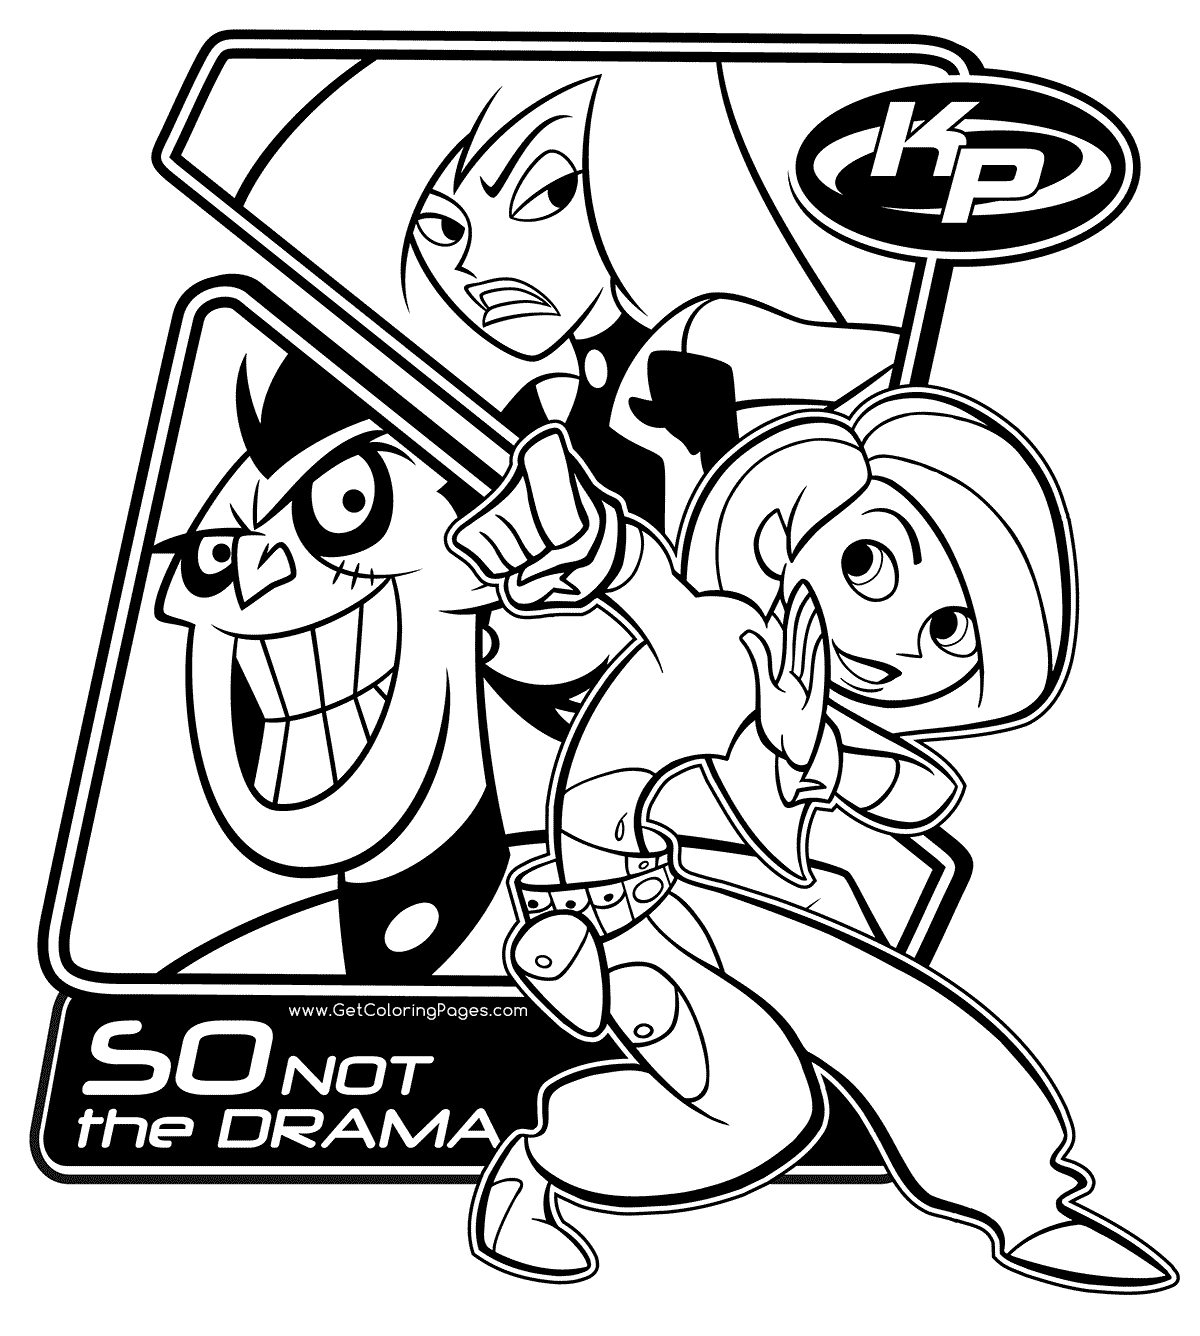 Kim with Dr. Drakken and Shego Coloring Pages